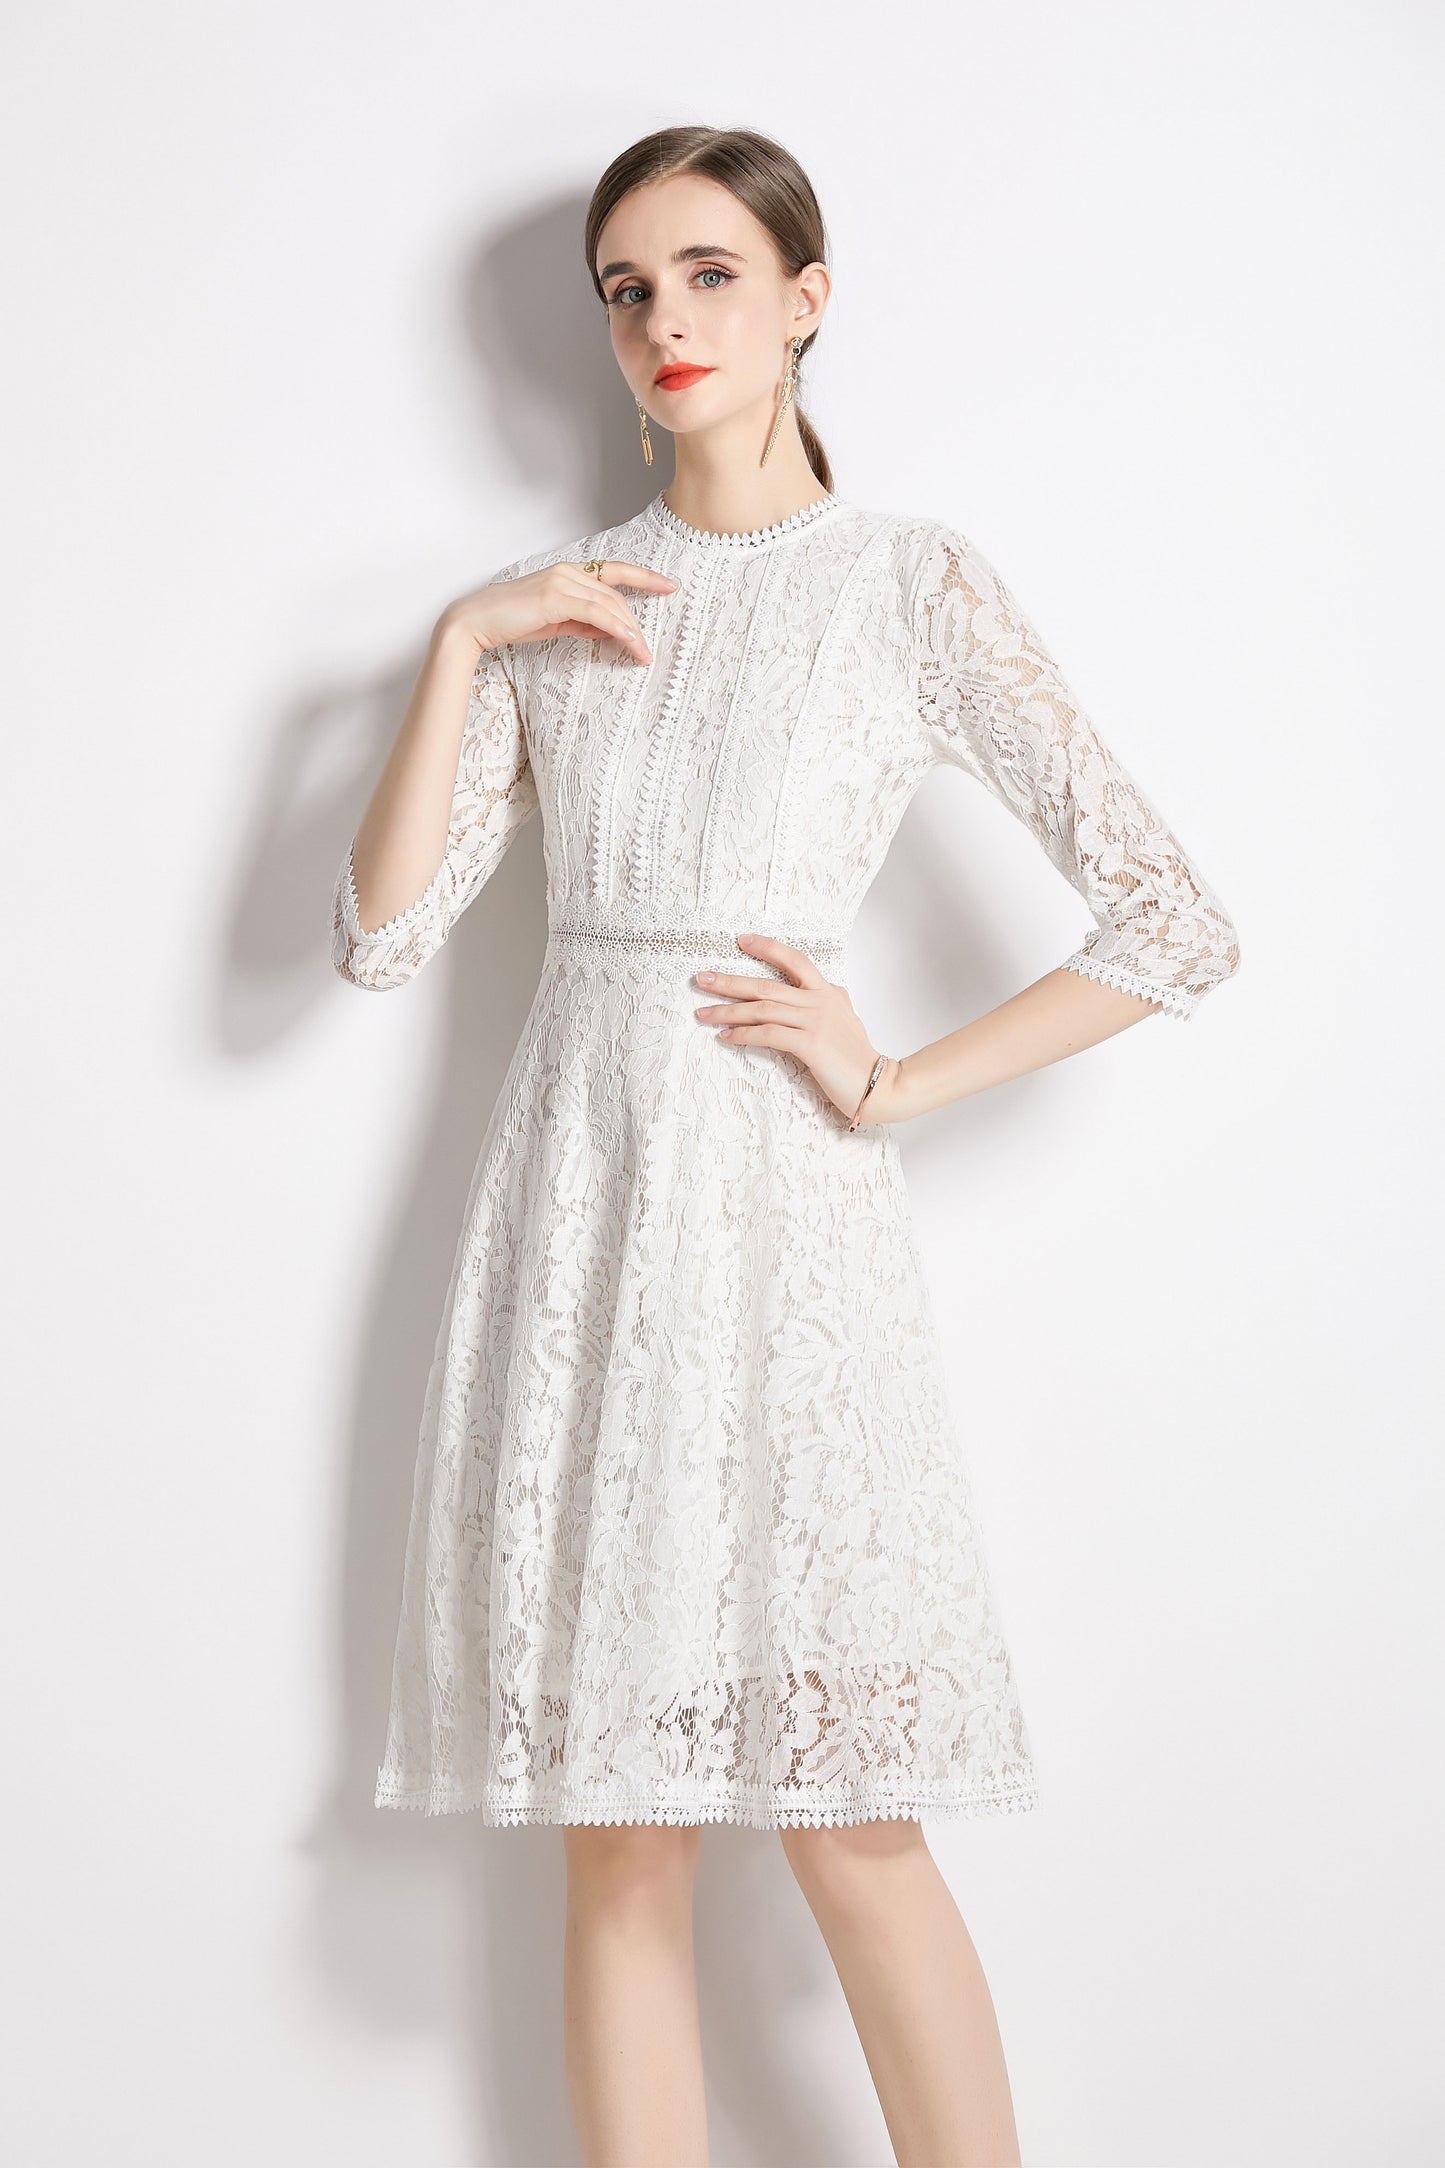 White Tunic Floral Lace 3/4 sleeves Crew Neck Midi Dress